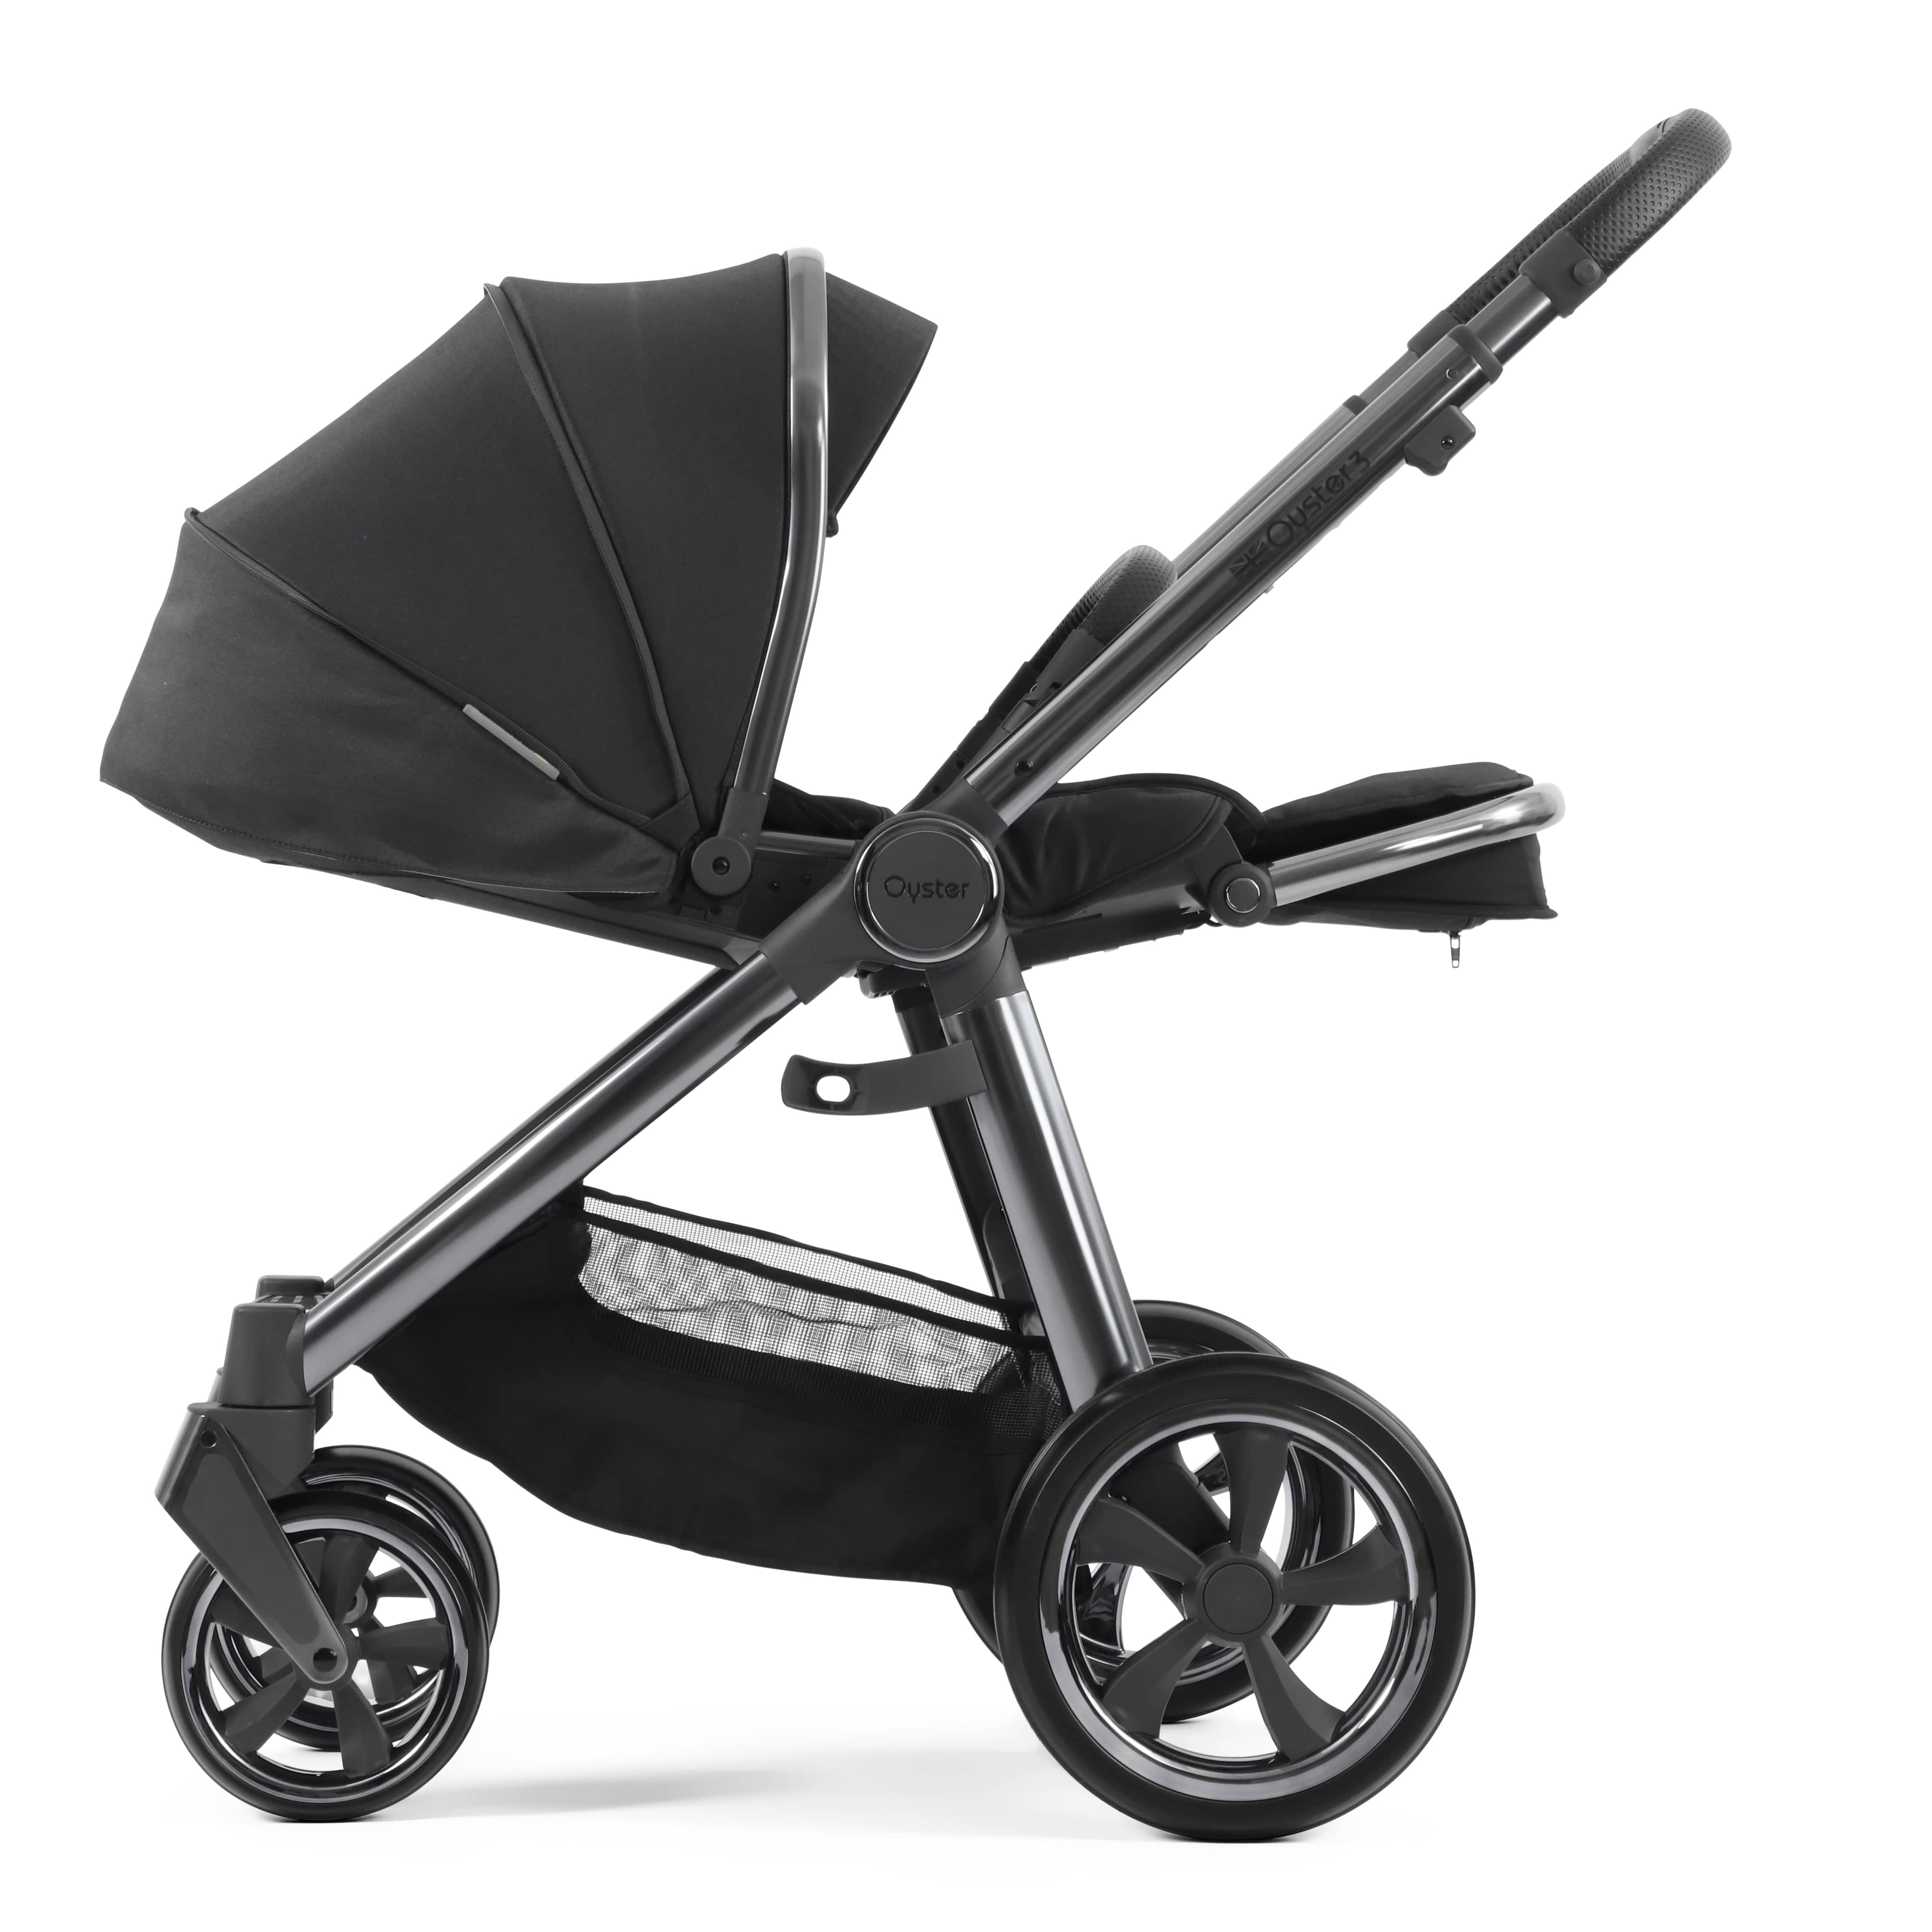 BabyStyle baby prams BabyStyle Oyster3 Pram & Carrycot Carbonite 14730-CRB